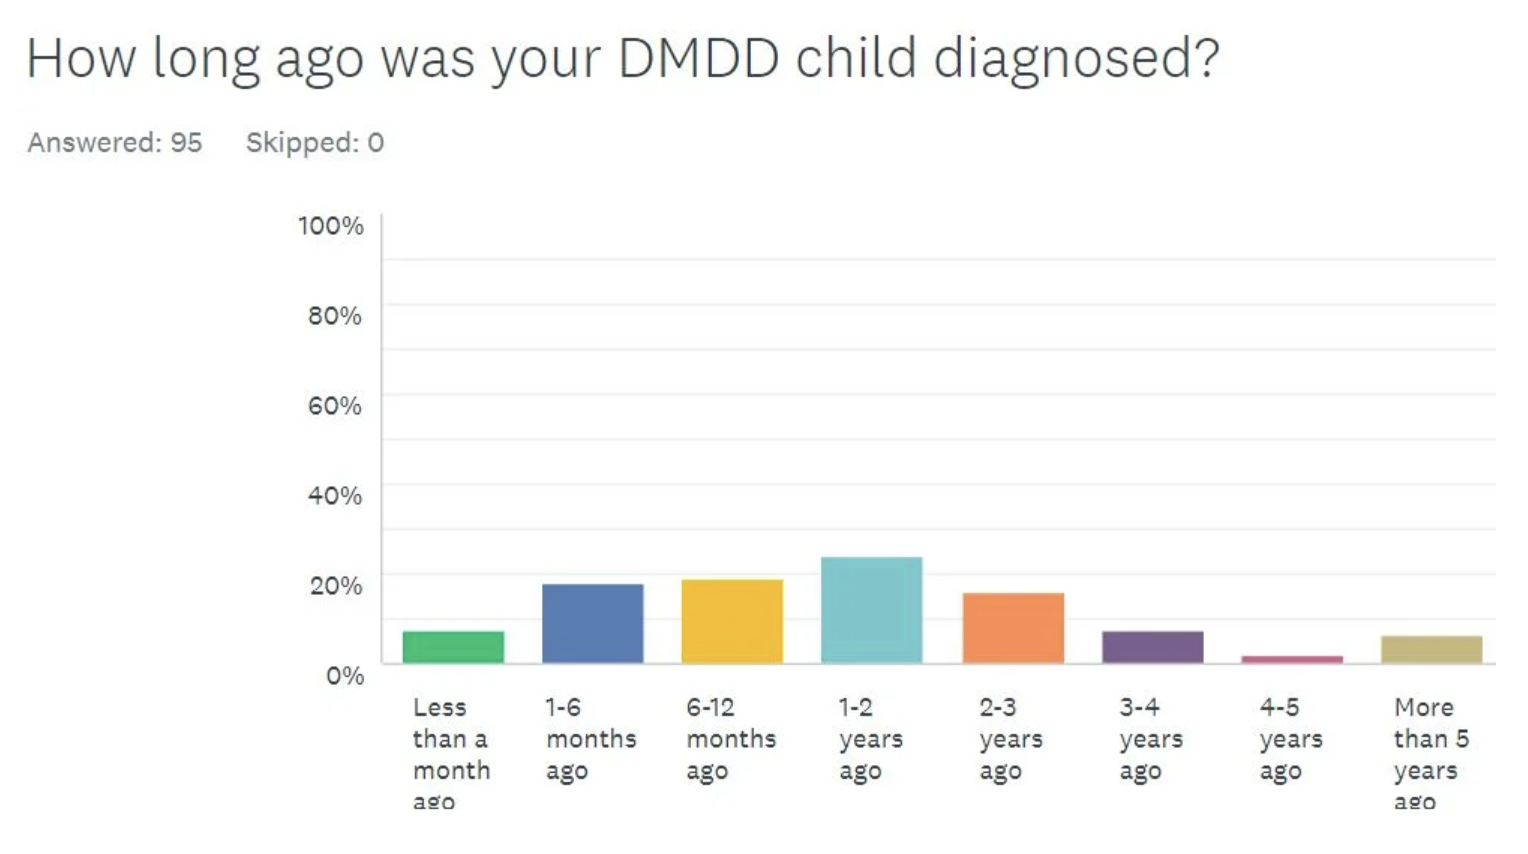 How long ago was your child diagnosed with DMDD?